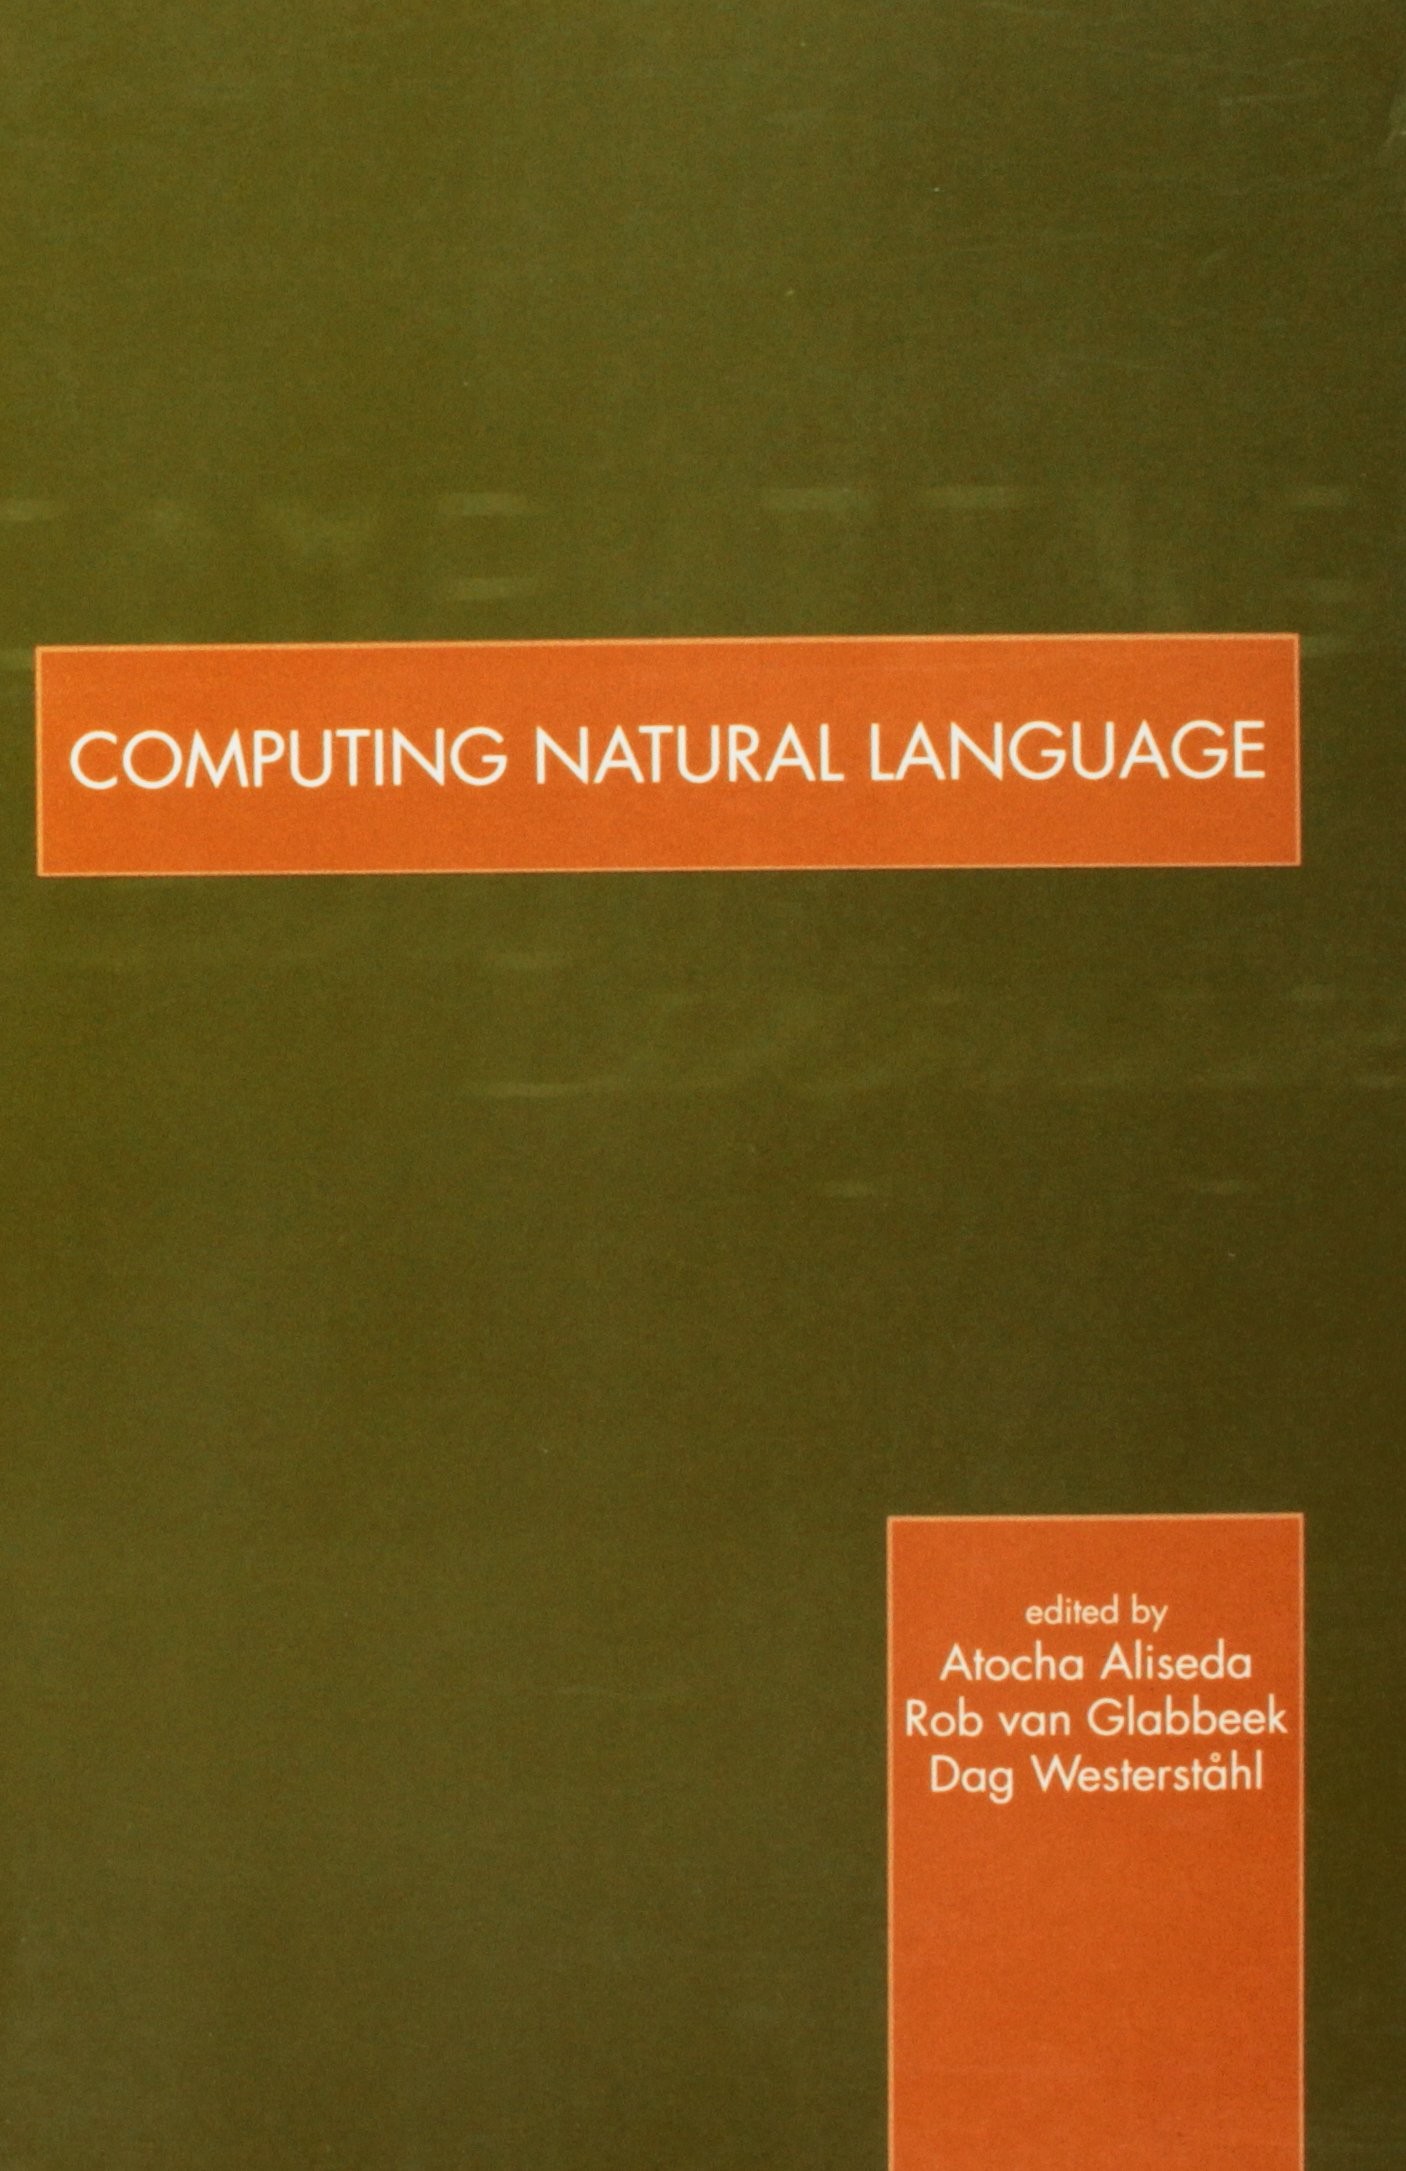 Computing Natural Language: Context, Structure, and Processes